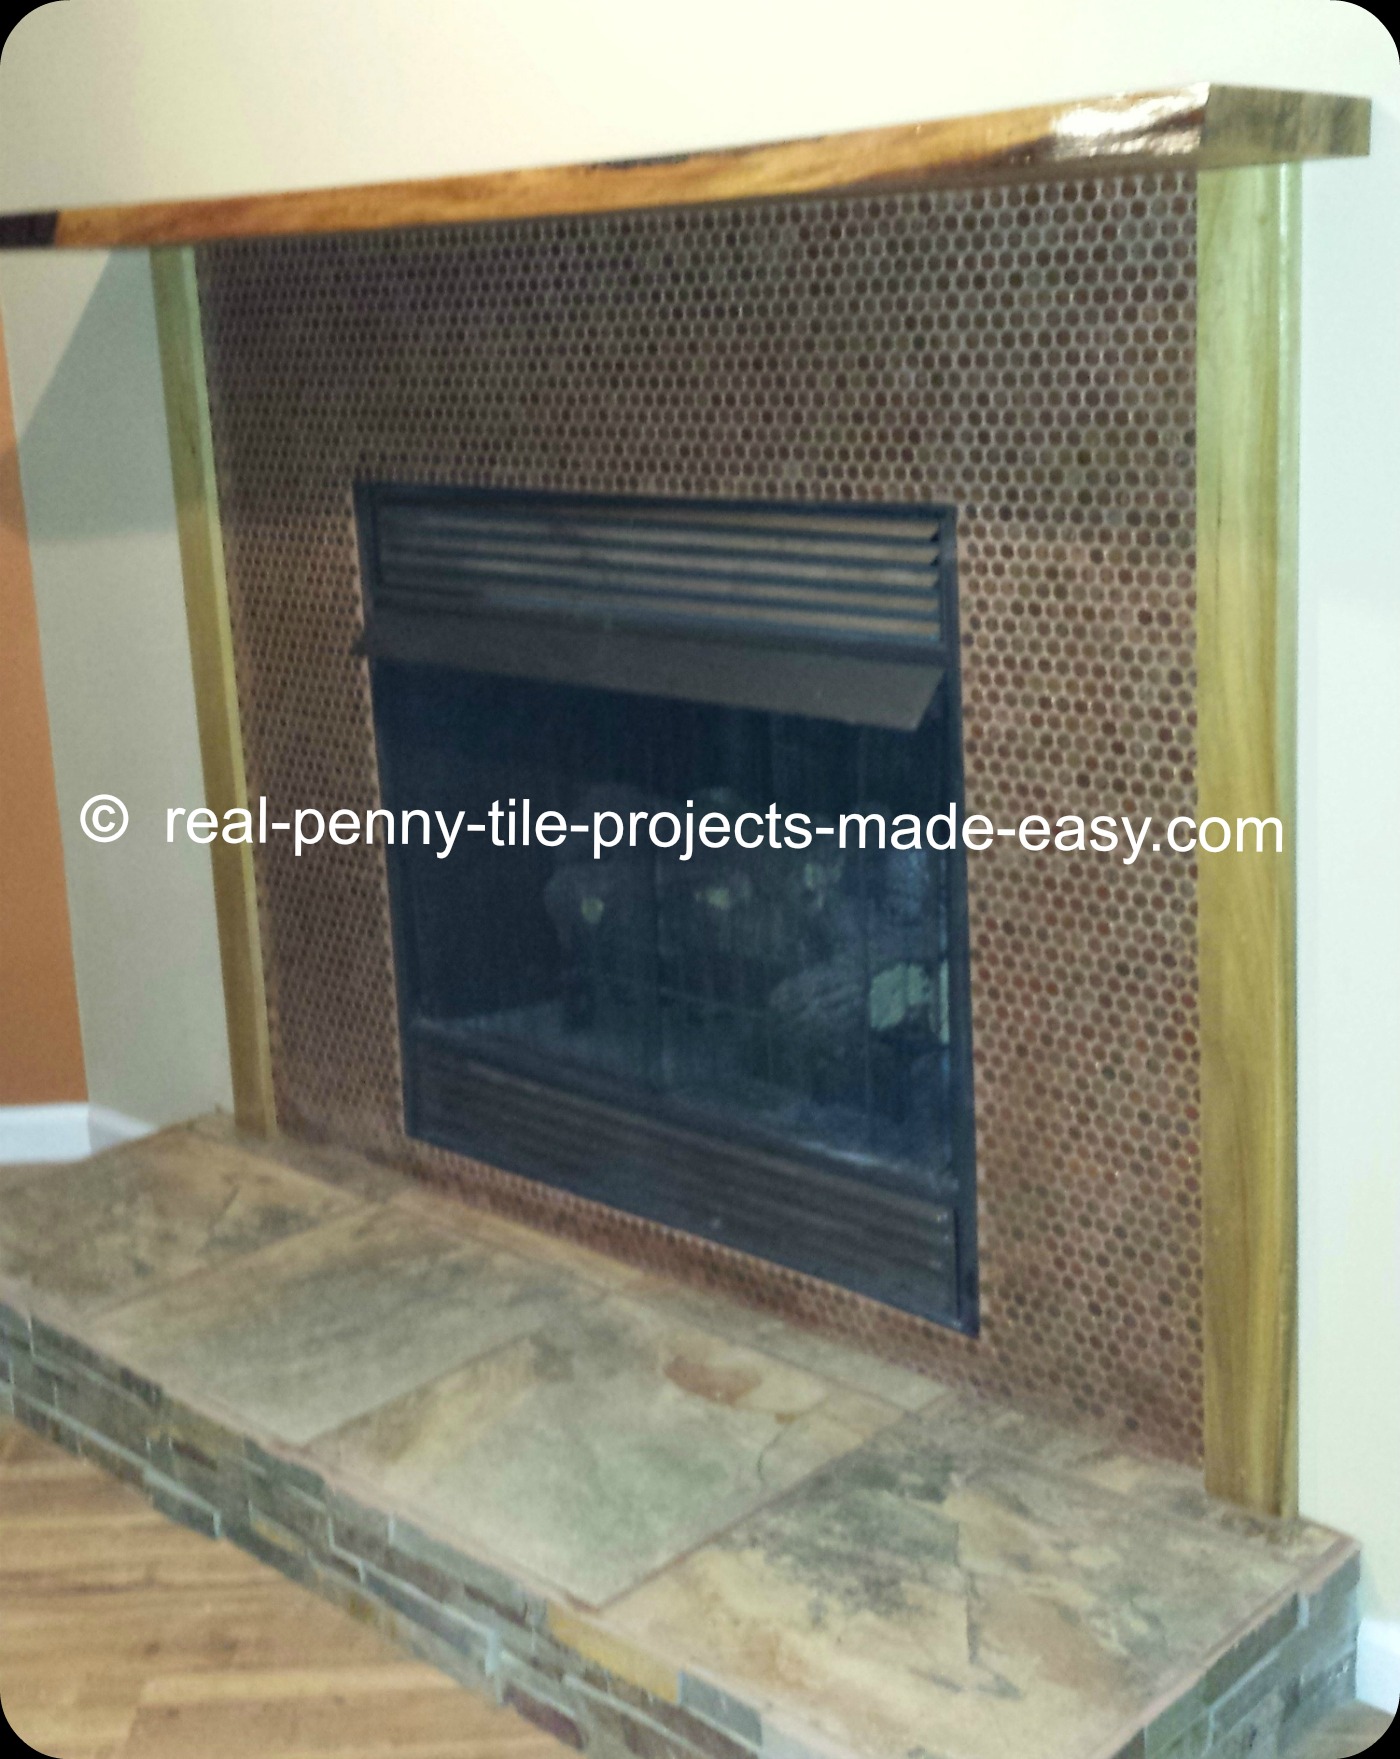 Real penny tile sheets installed on fireplace.